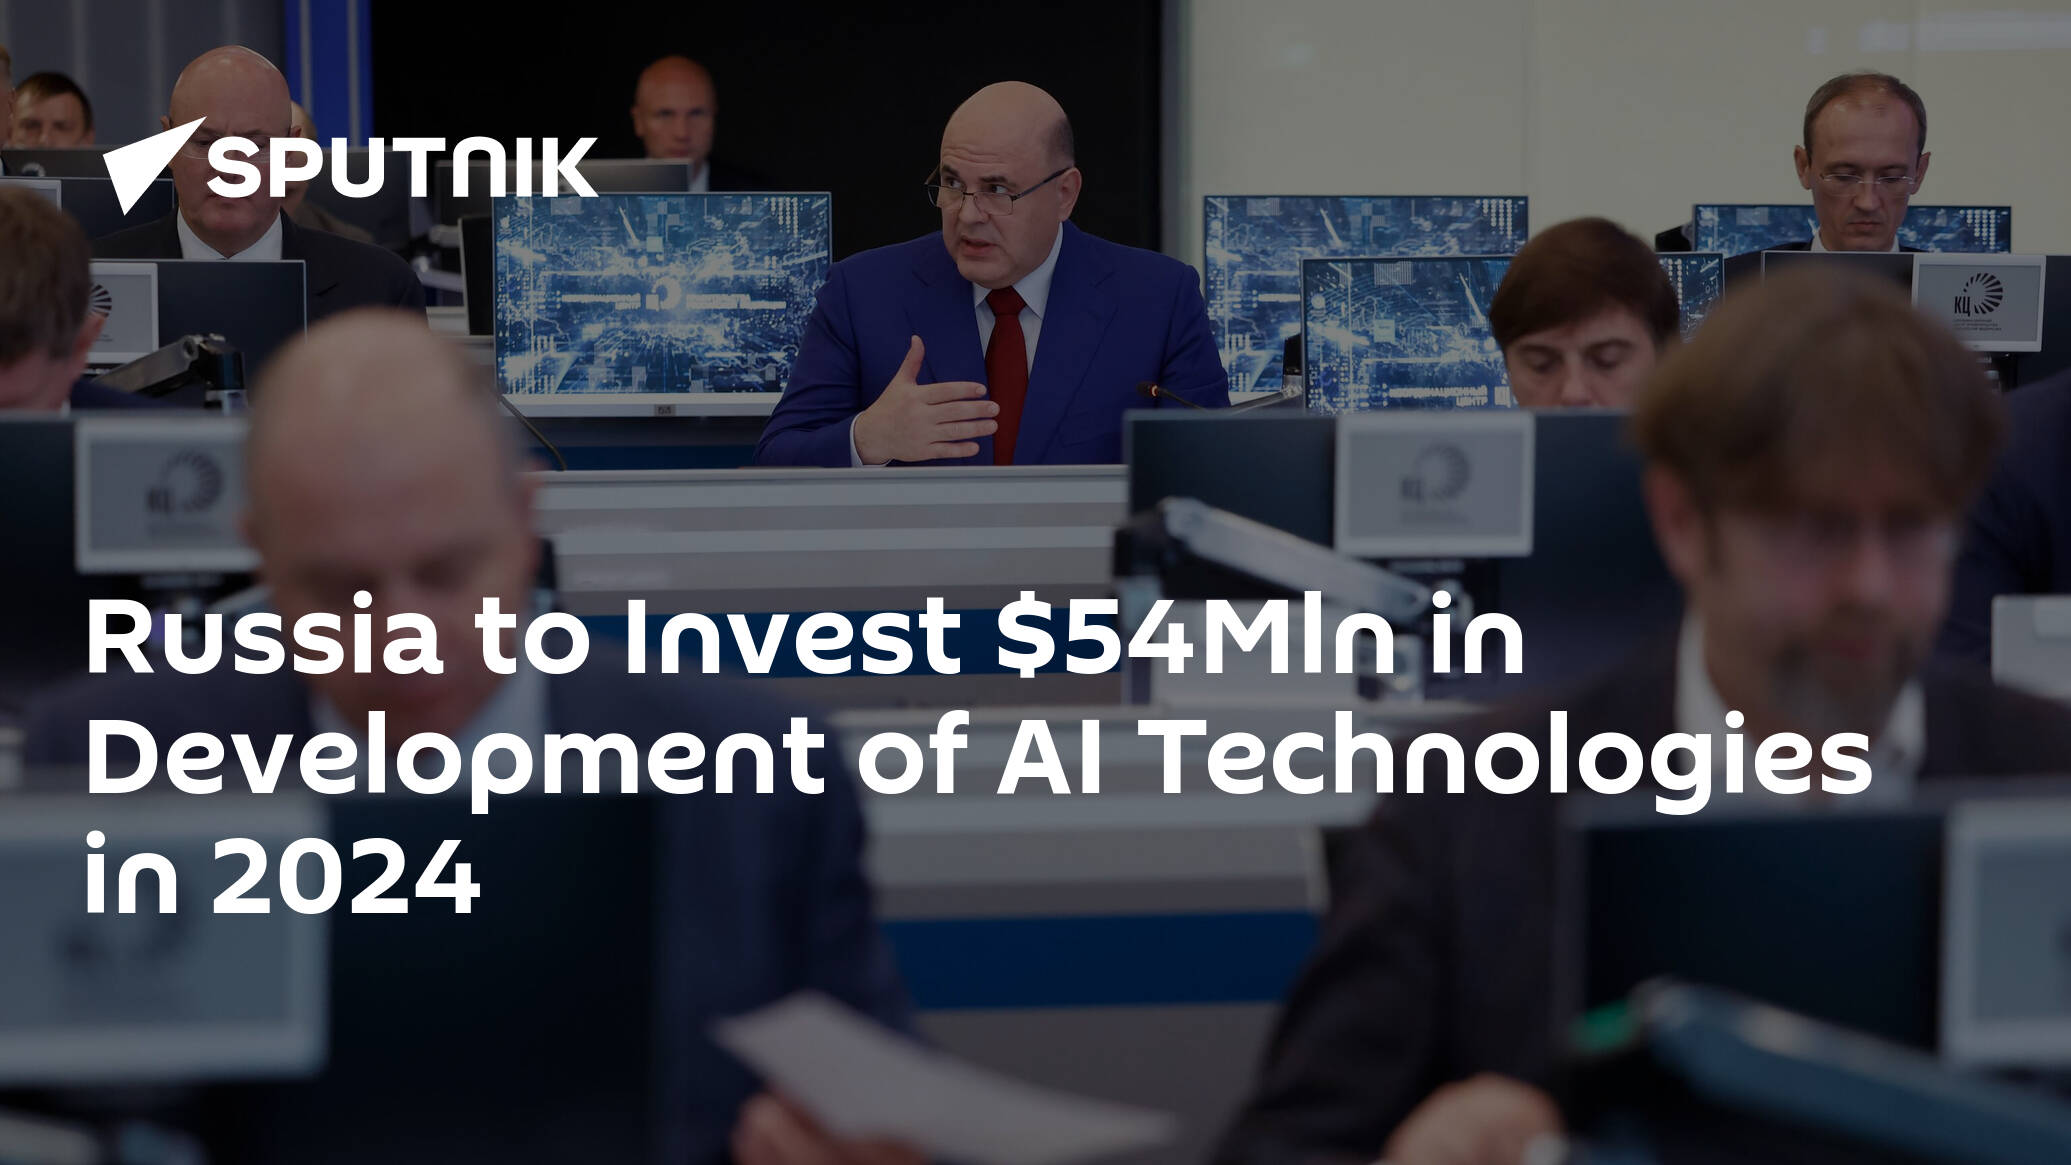 Russia to Invest Mln in Development of AI Technologies in 2024